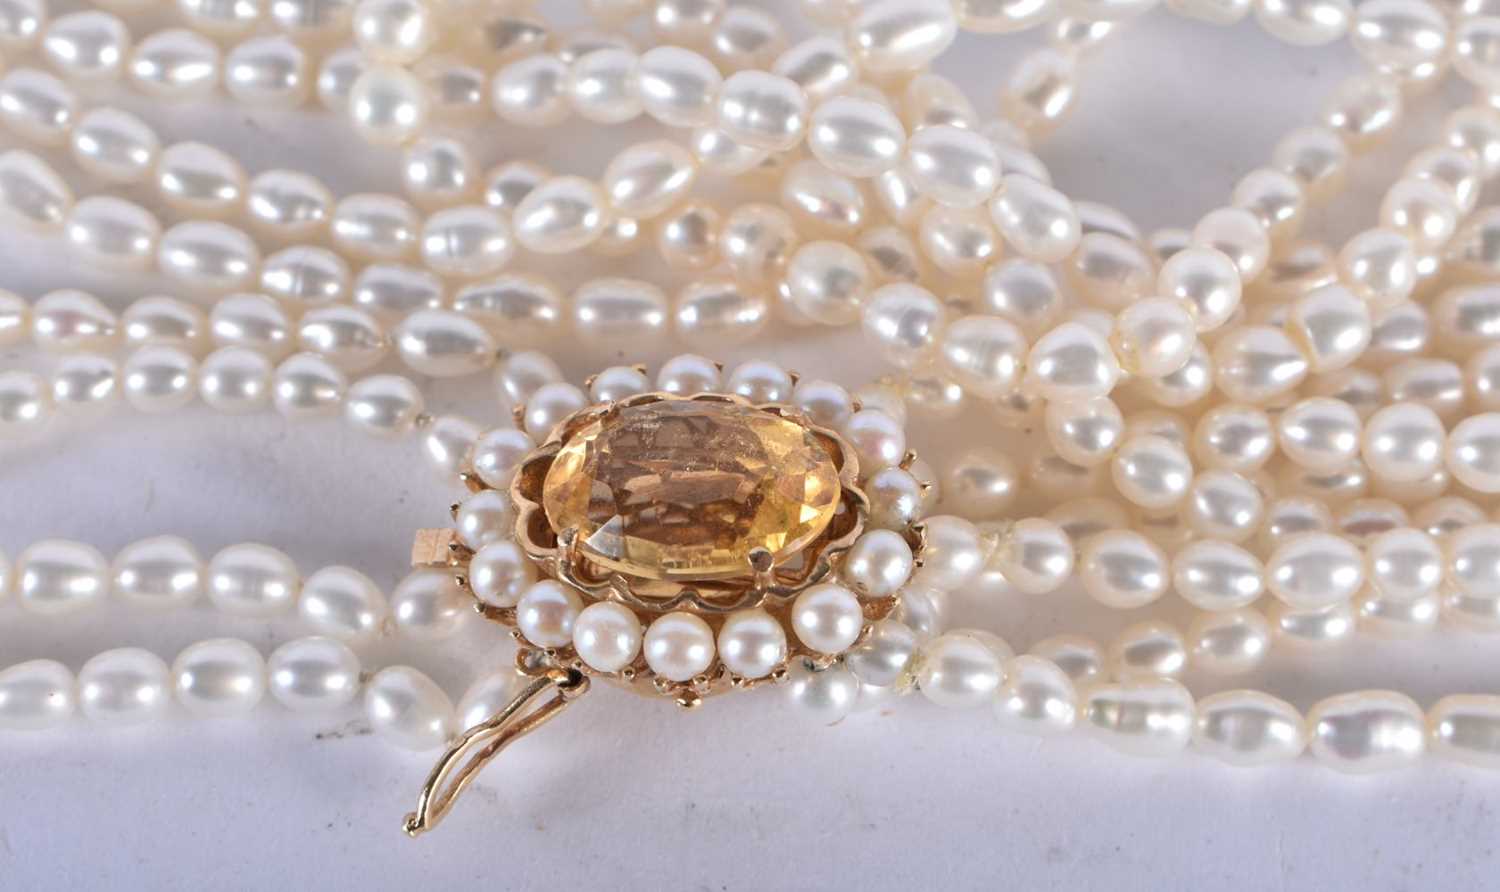 A Six Strand Pearl Necklace with a 14 Carat Gold and Citrine Clasp. 43cm long, weight 58.21g - Image 3 of 4